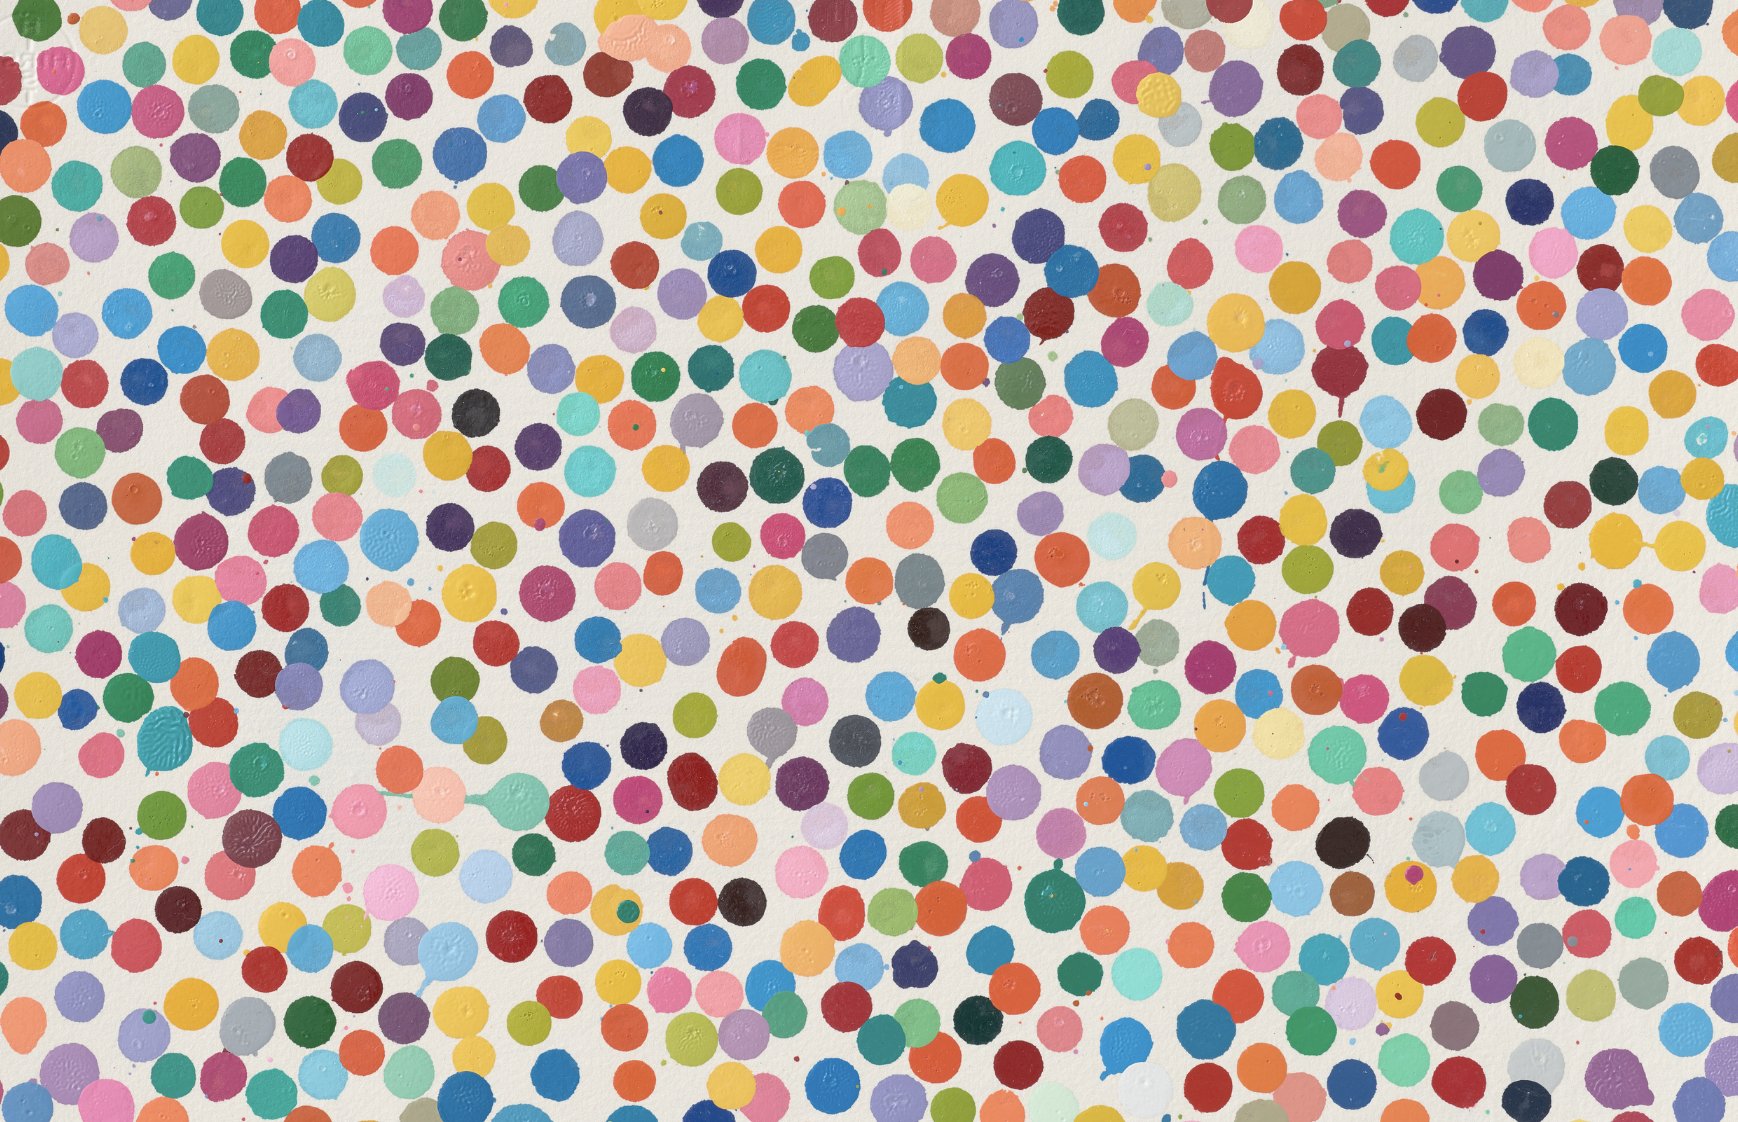 extraordinayr-objects-damien-hirst-the-currency-website-banner.jpg